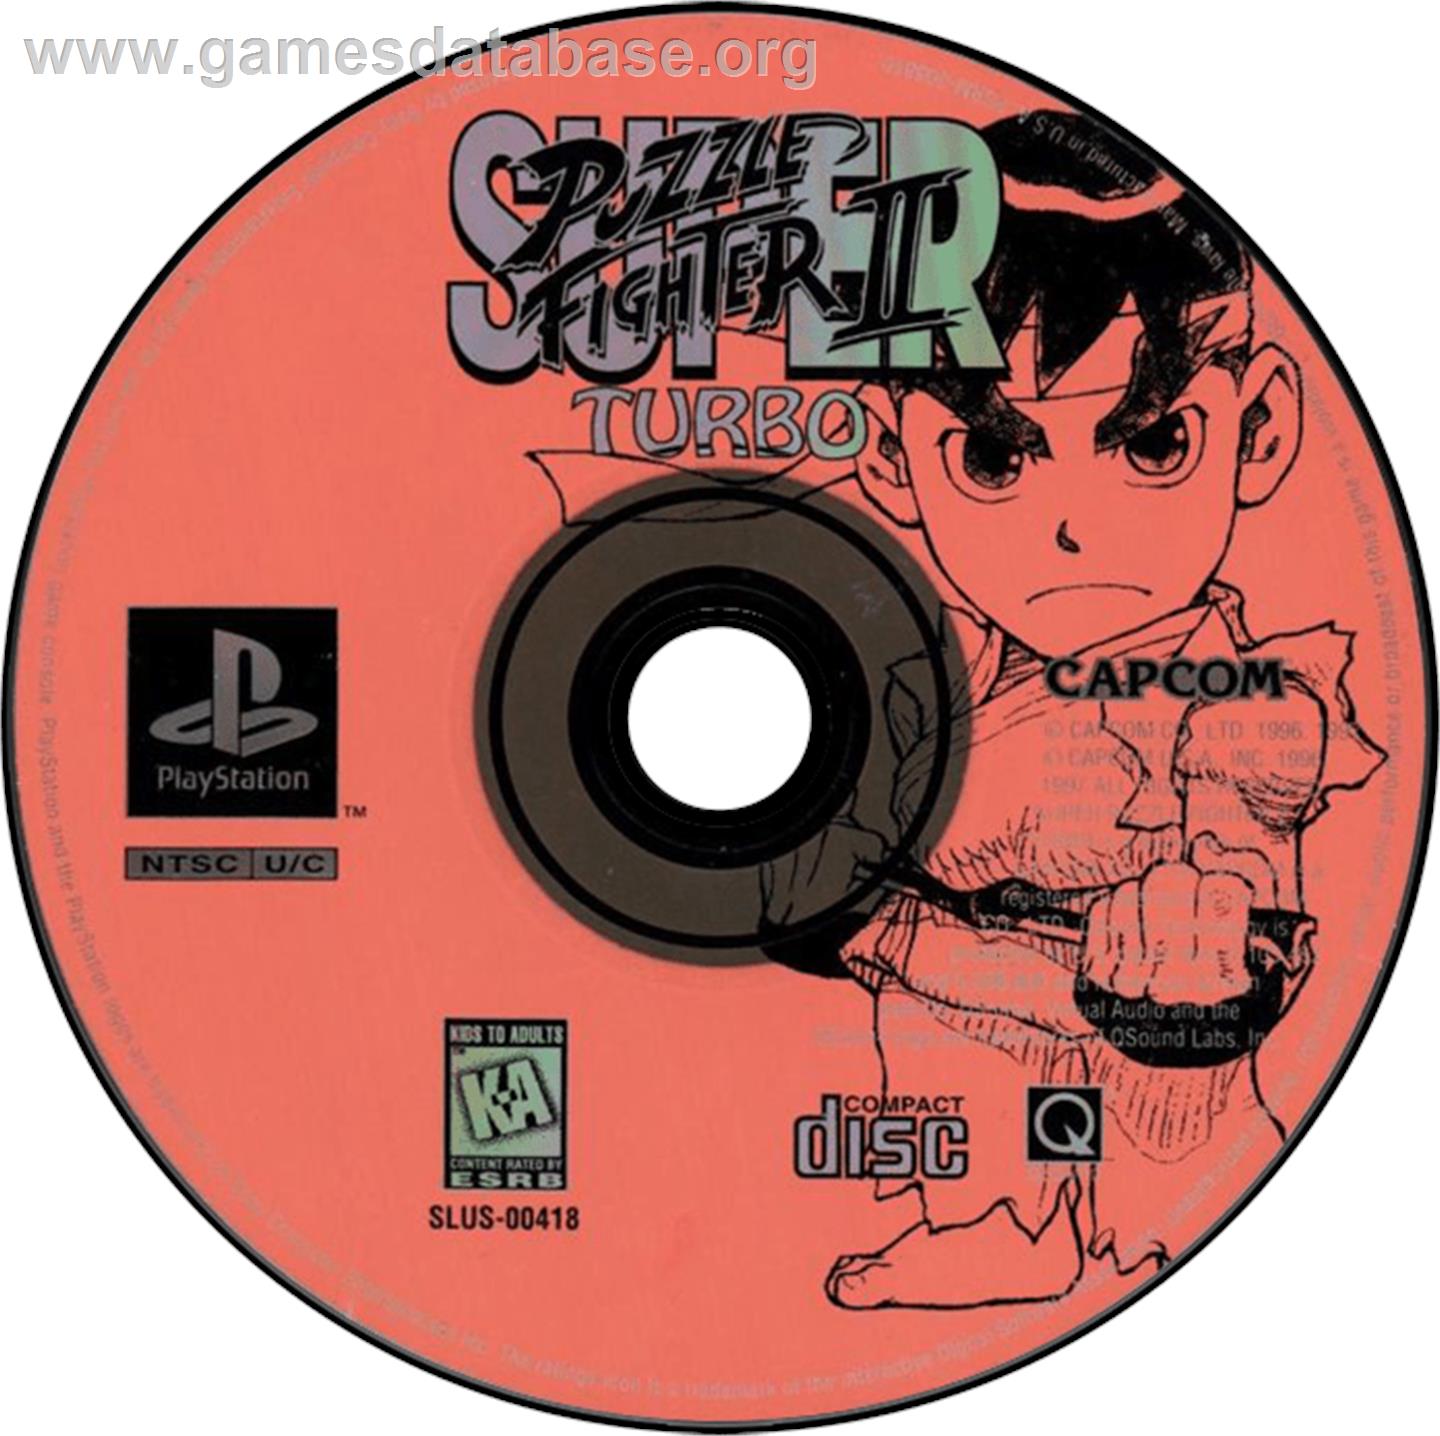 Super Puzzle Fighter II Turbo - Sony Playstation - Artwork - Disc